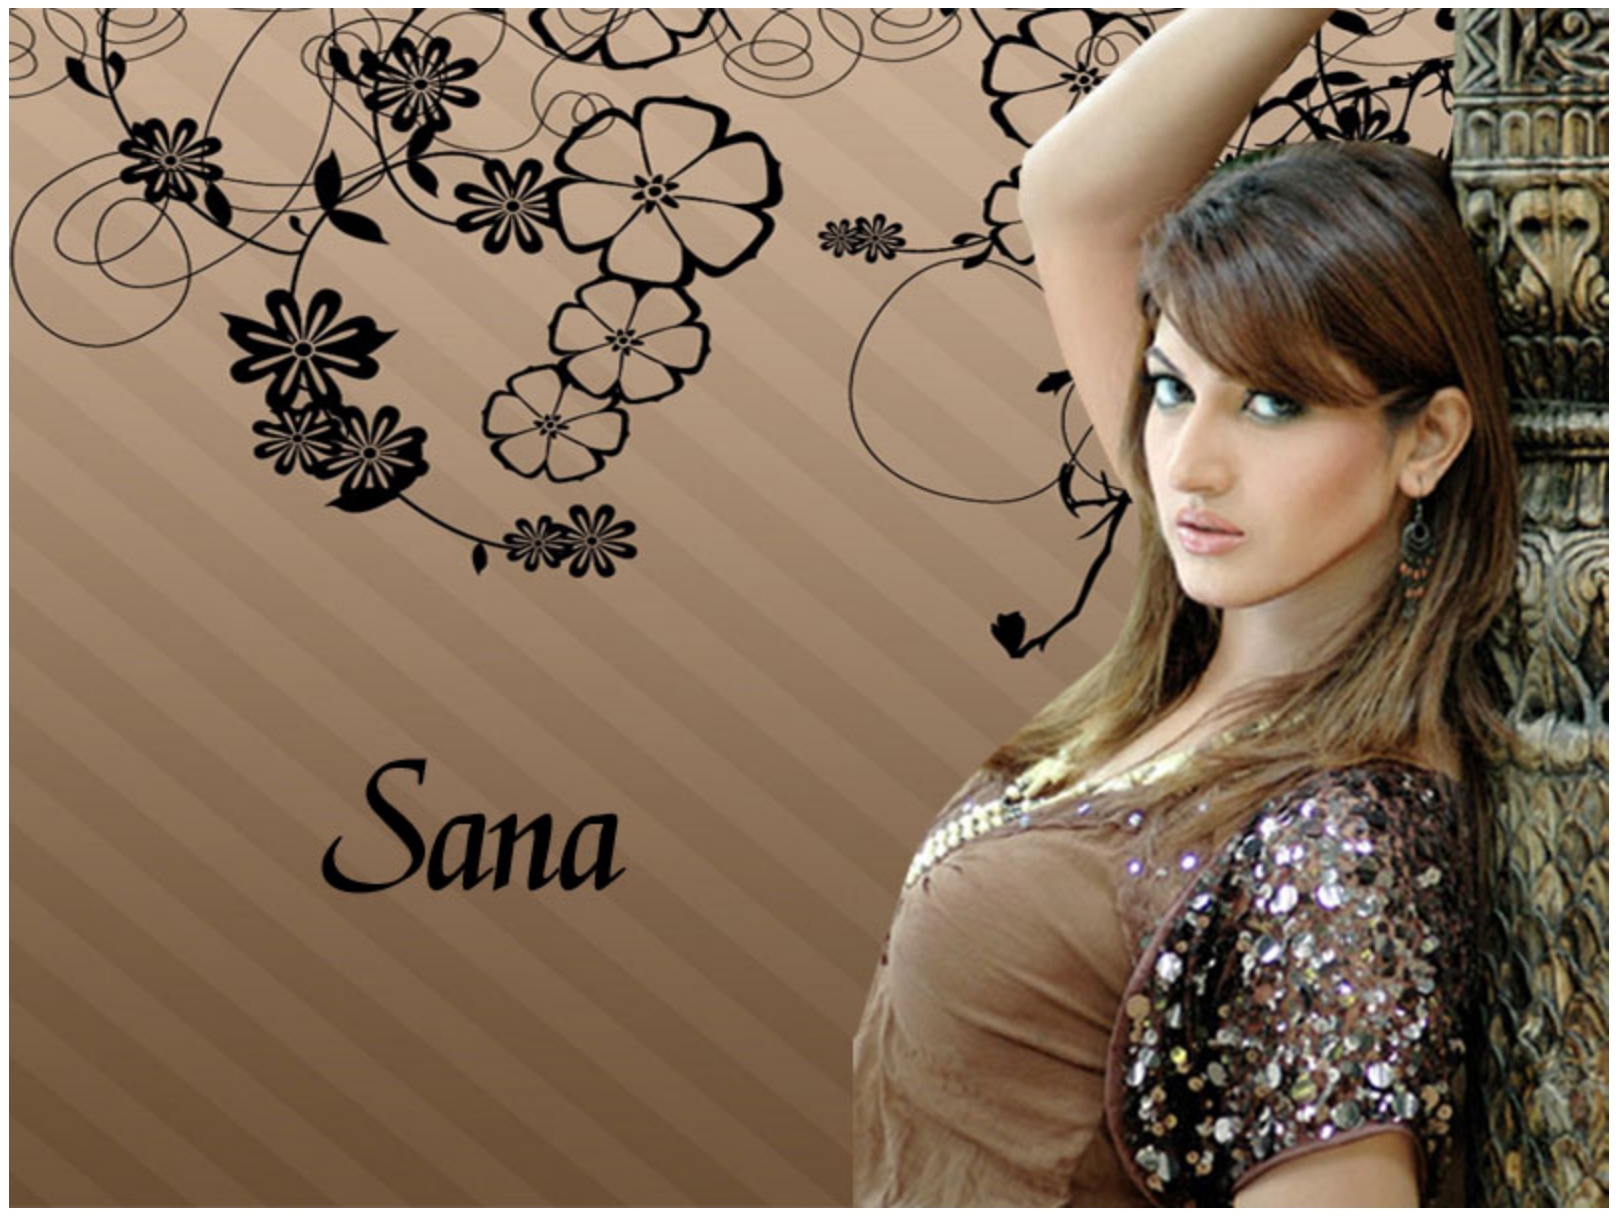 Image For Pakistani Actress Sana Hd Picture - Pakistani Actress Sana Hd -  1618x1216 Wallpaper 